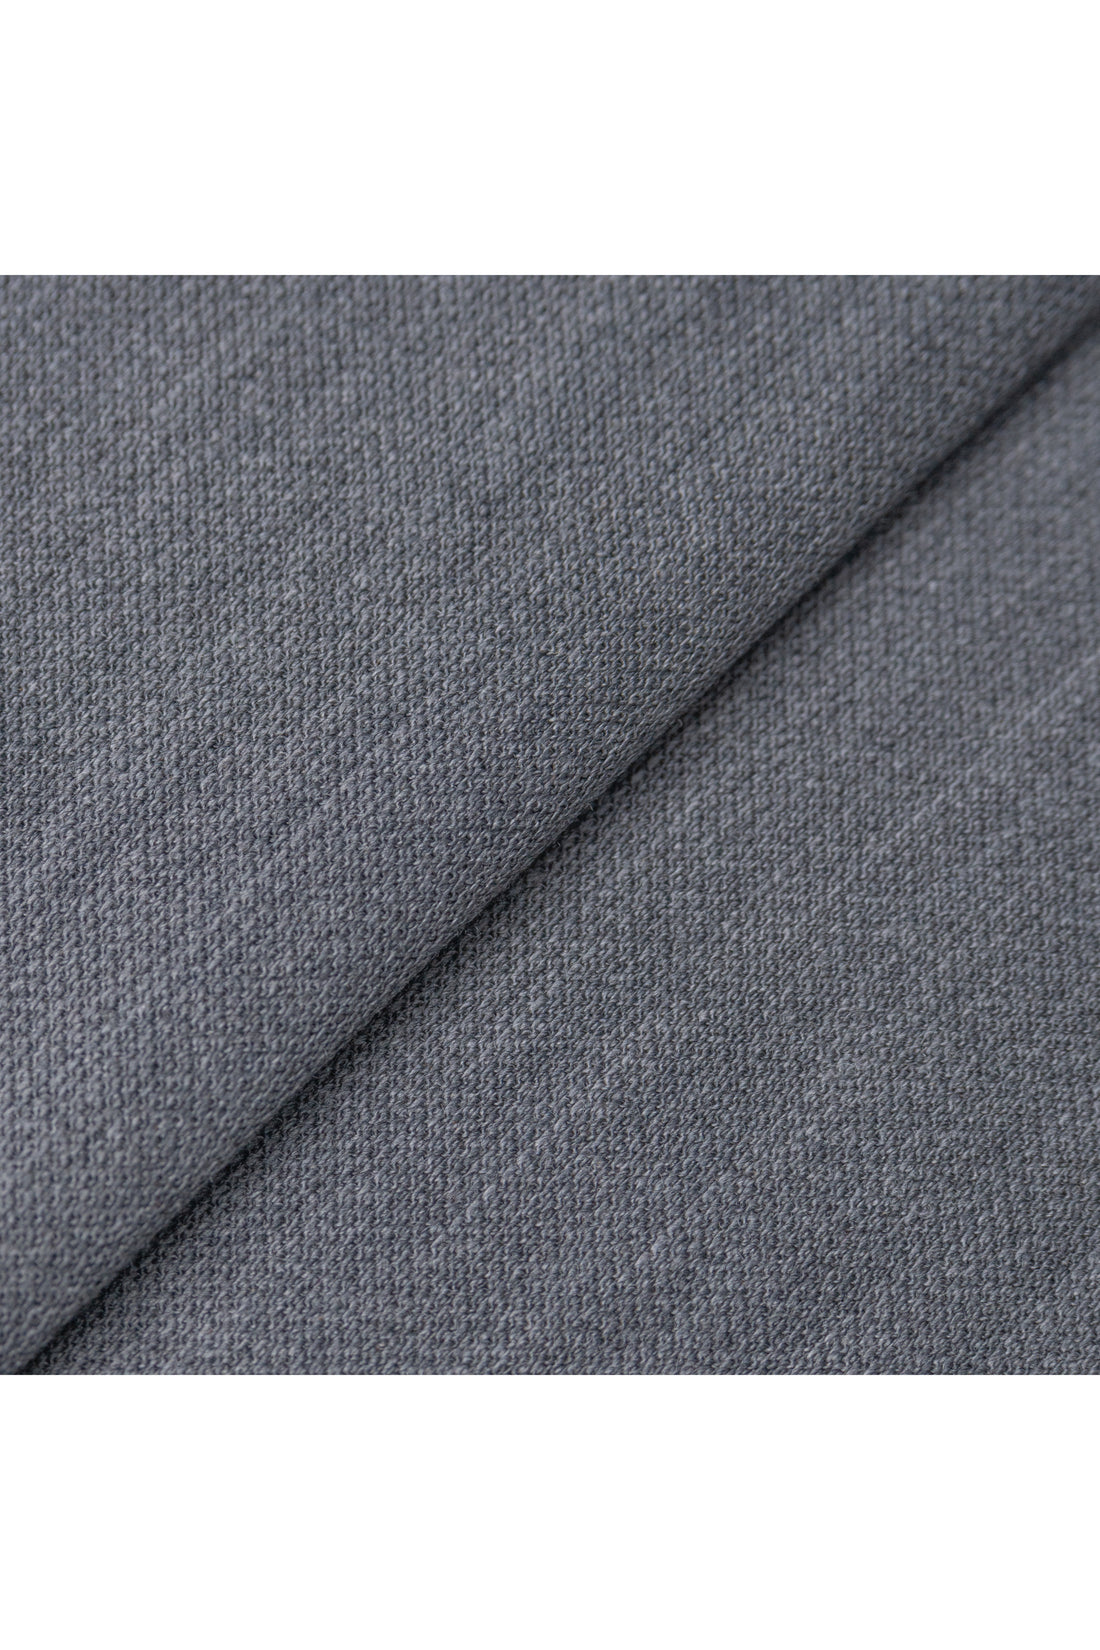 Grey 120's Jersey Knit Solid Pant